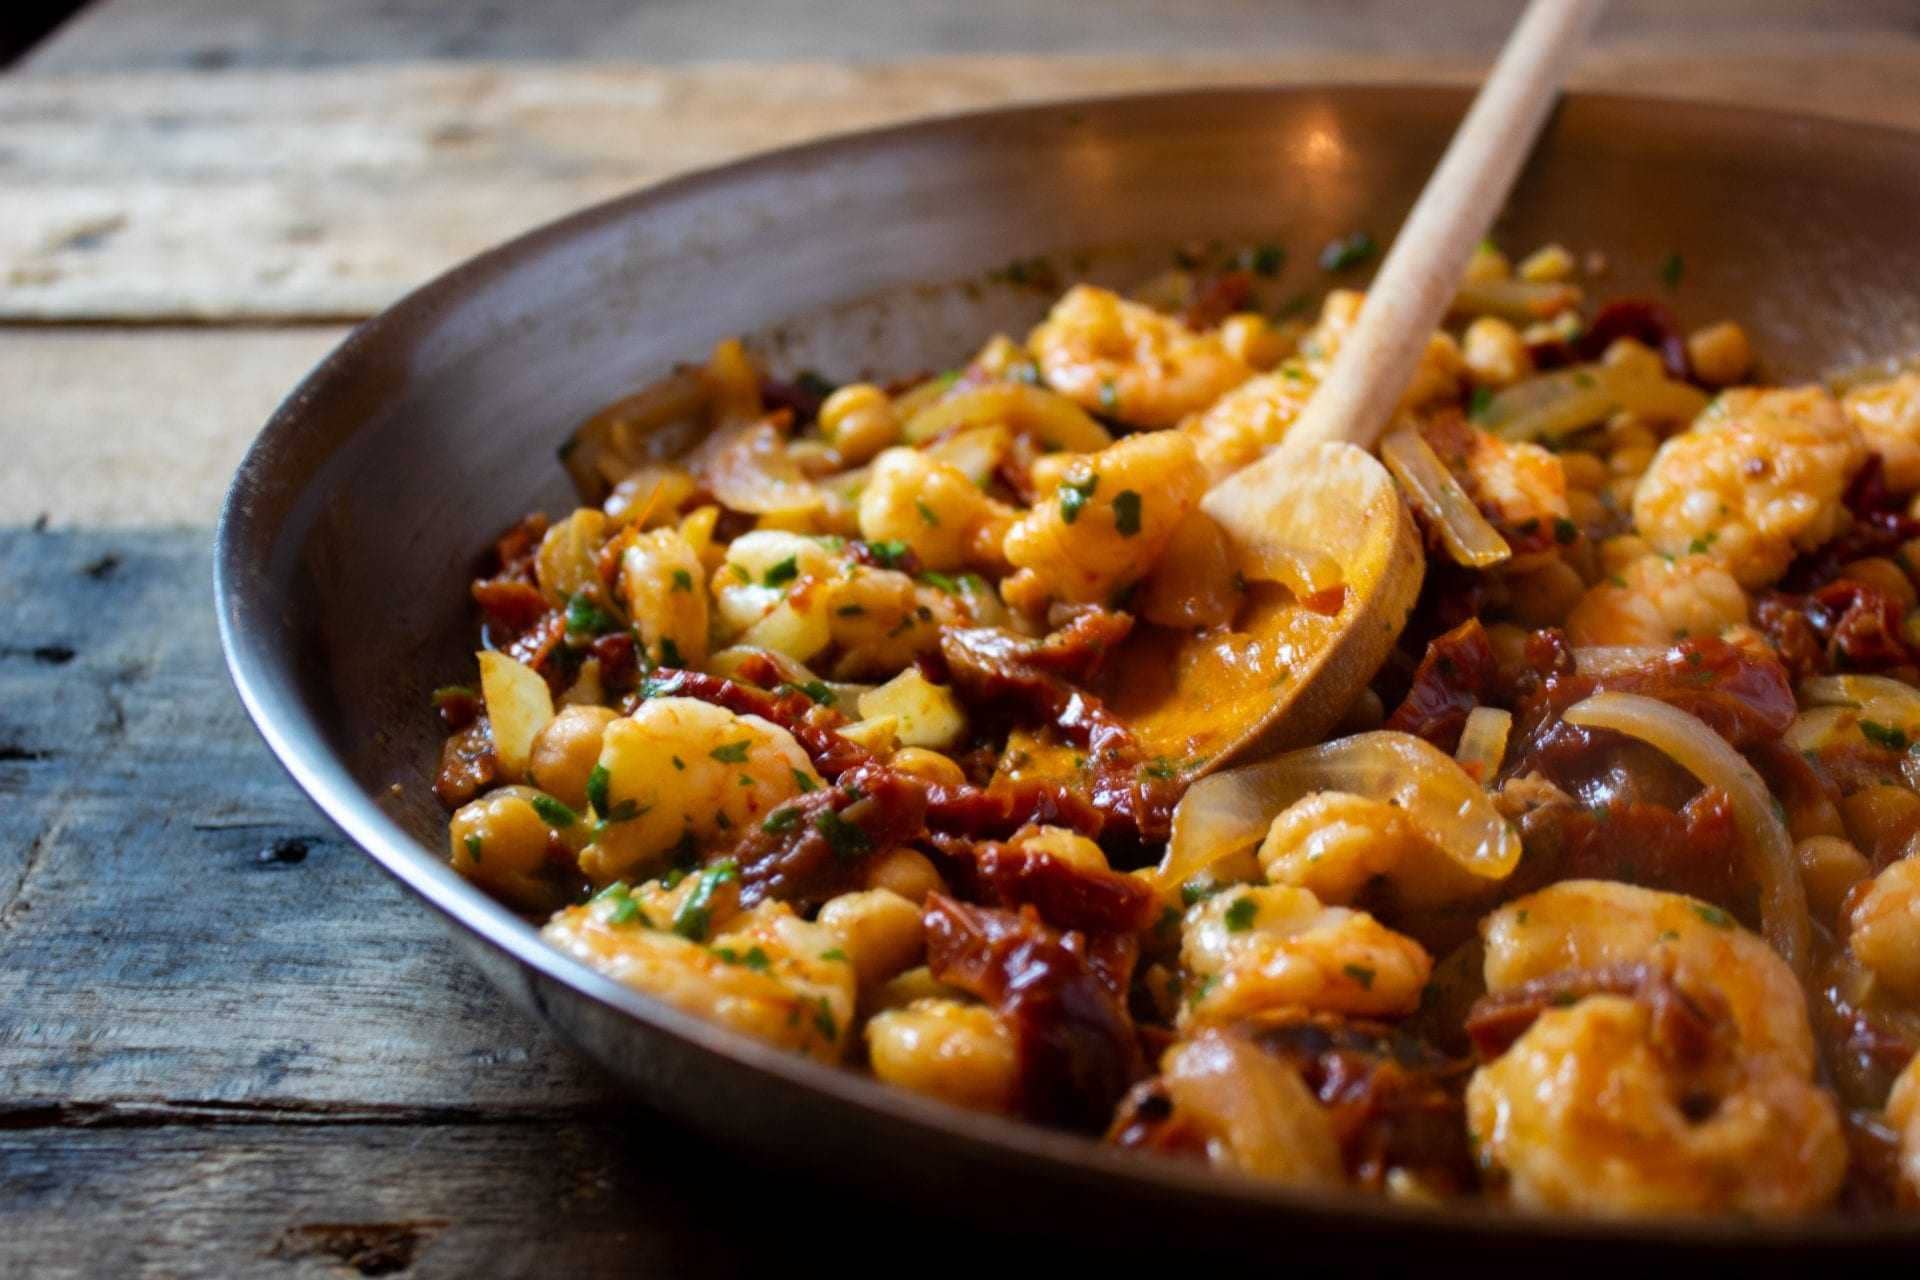 Shrimp and Sun-Dried Tomatoes with Garlic and Olive Oil